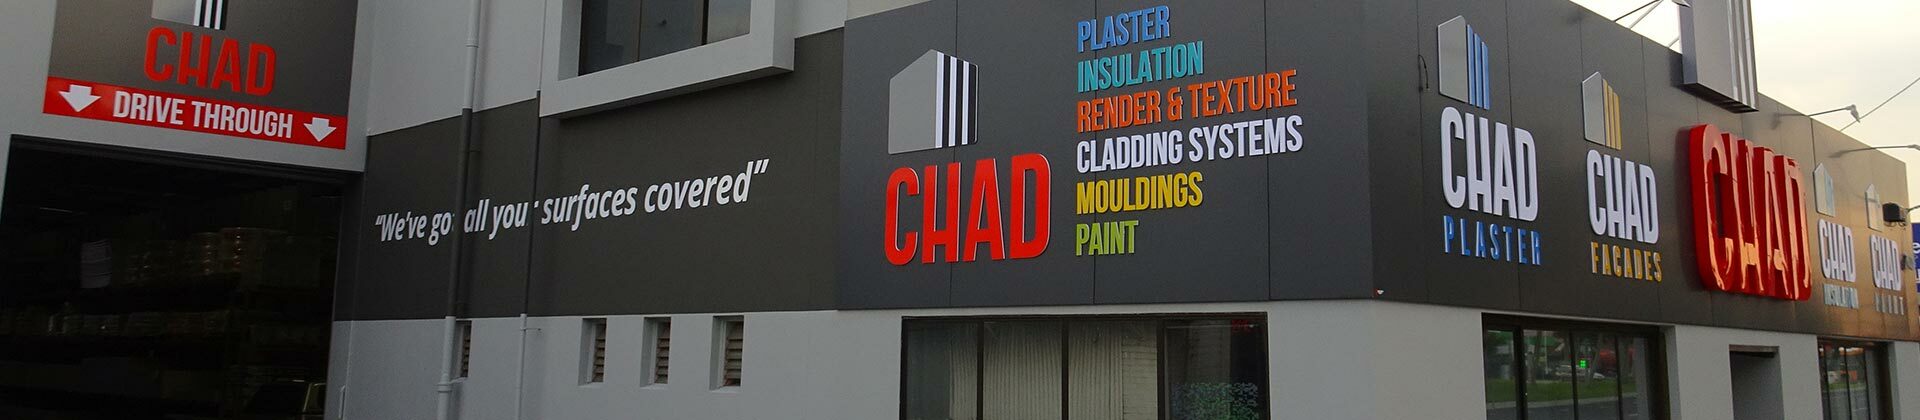 aluminium-external-cladding-for-smooth-surfaces-from-chad-banner